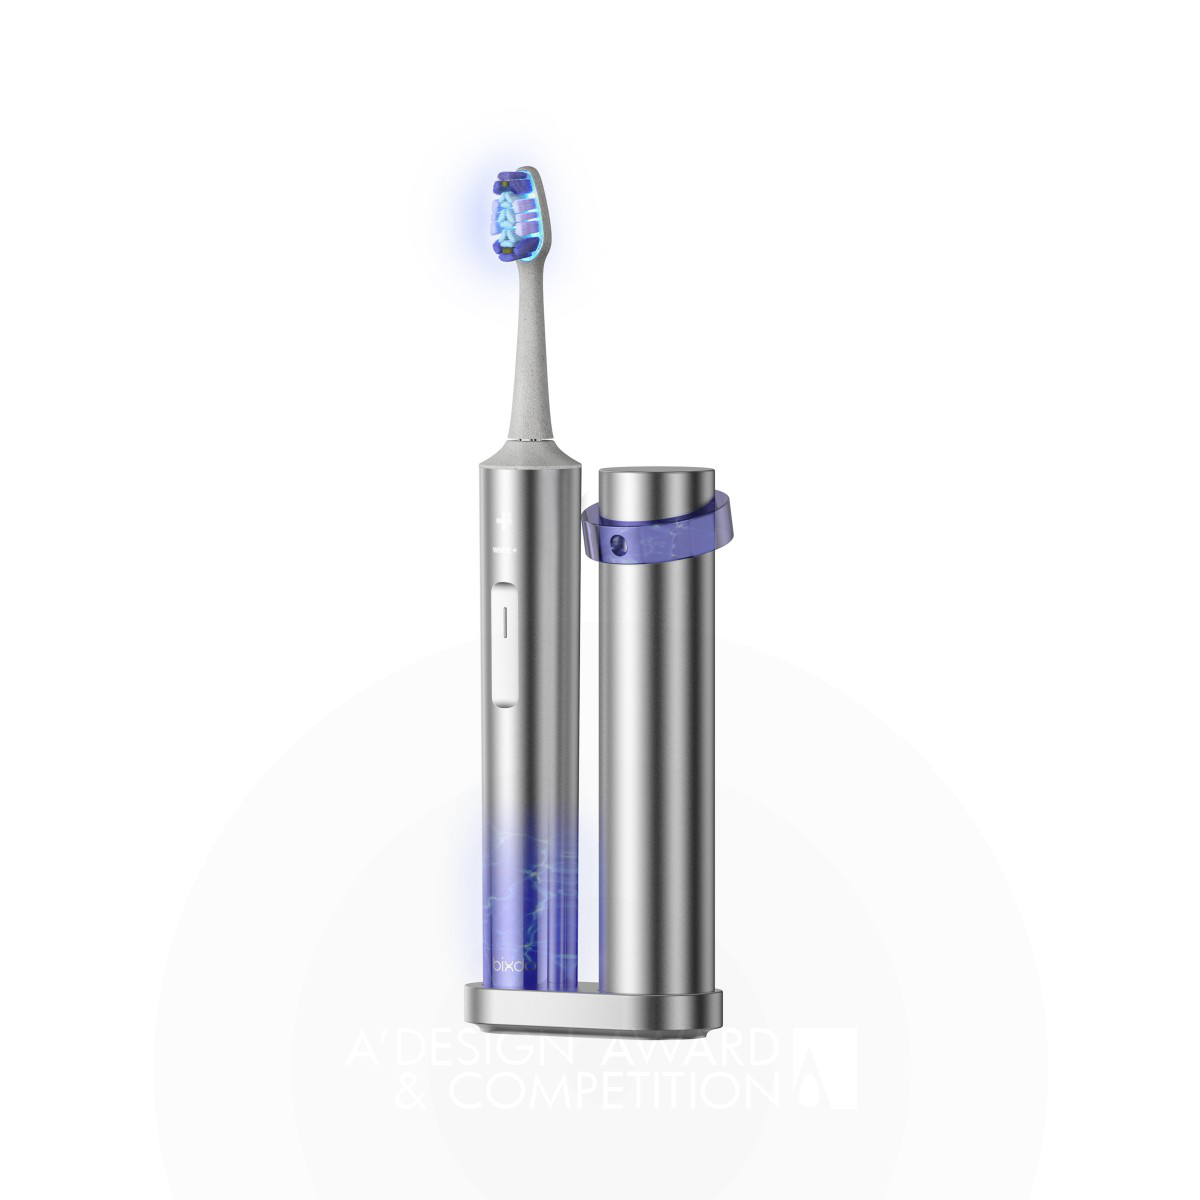 Chengshen Tan wins Iron at the prestigious A' Beauty, Personal Care and Cosmetic Products Design Award with Bixdo W60 Star Multifunctional Toothbrush.